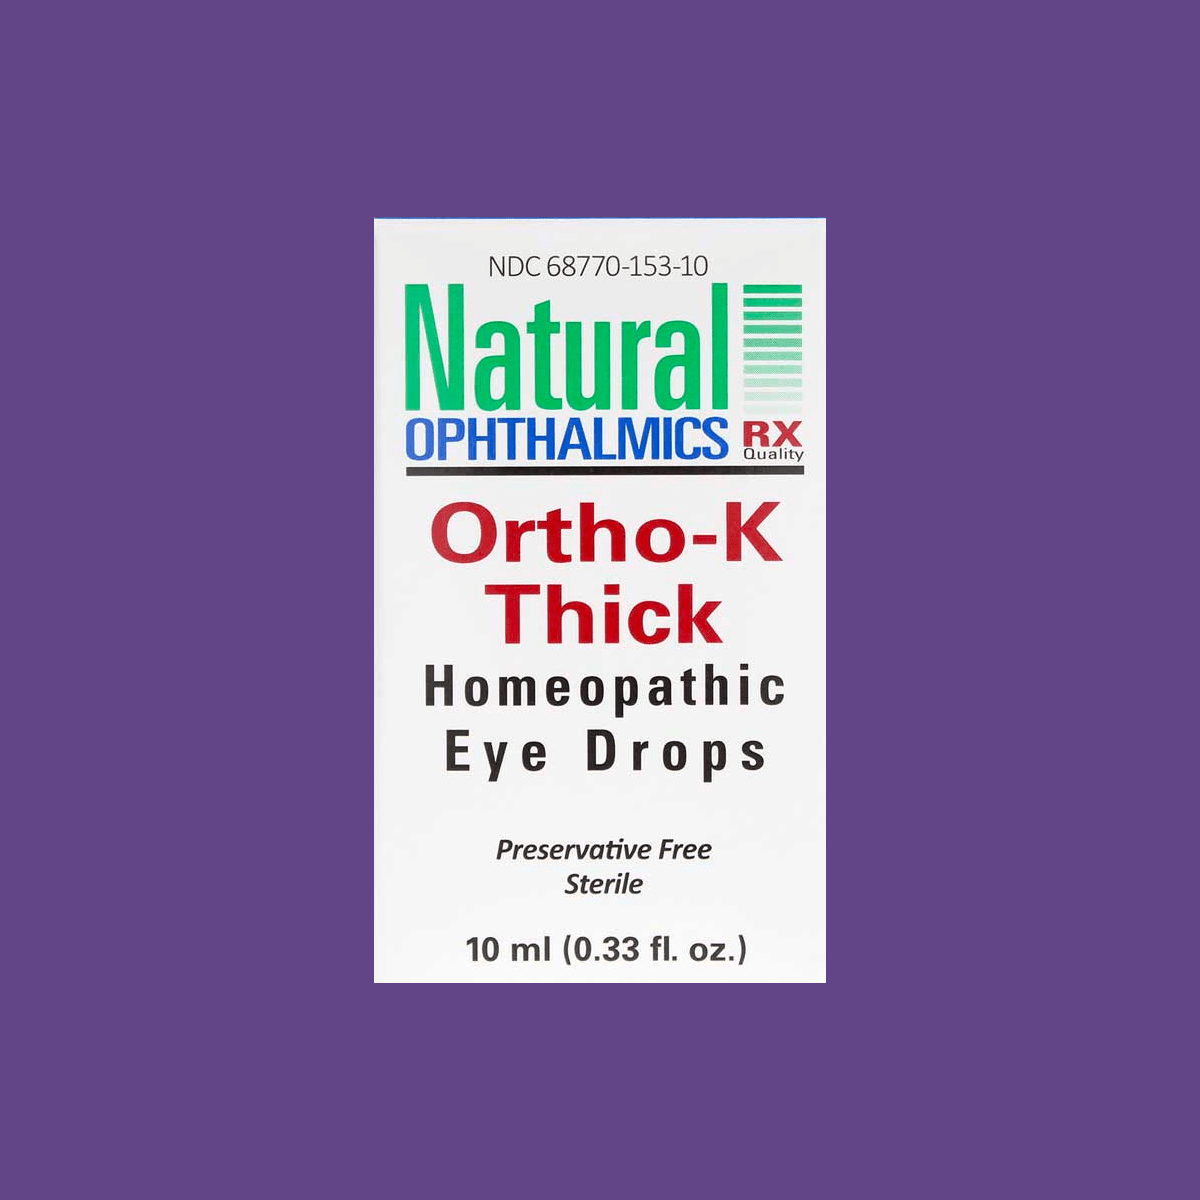 Natural Ophthalmics Ortho-K Thick , Night Time Eye Drops 10ml Bottle - Dryeye Rescue